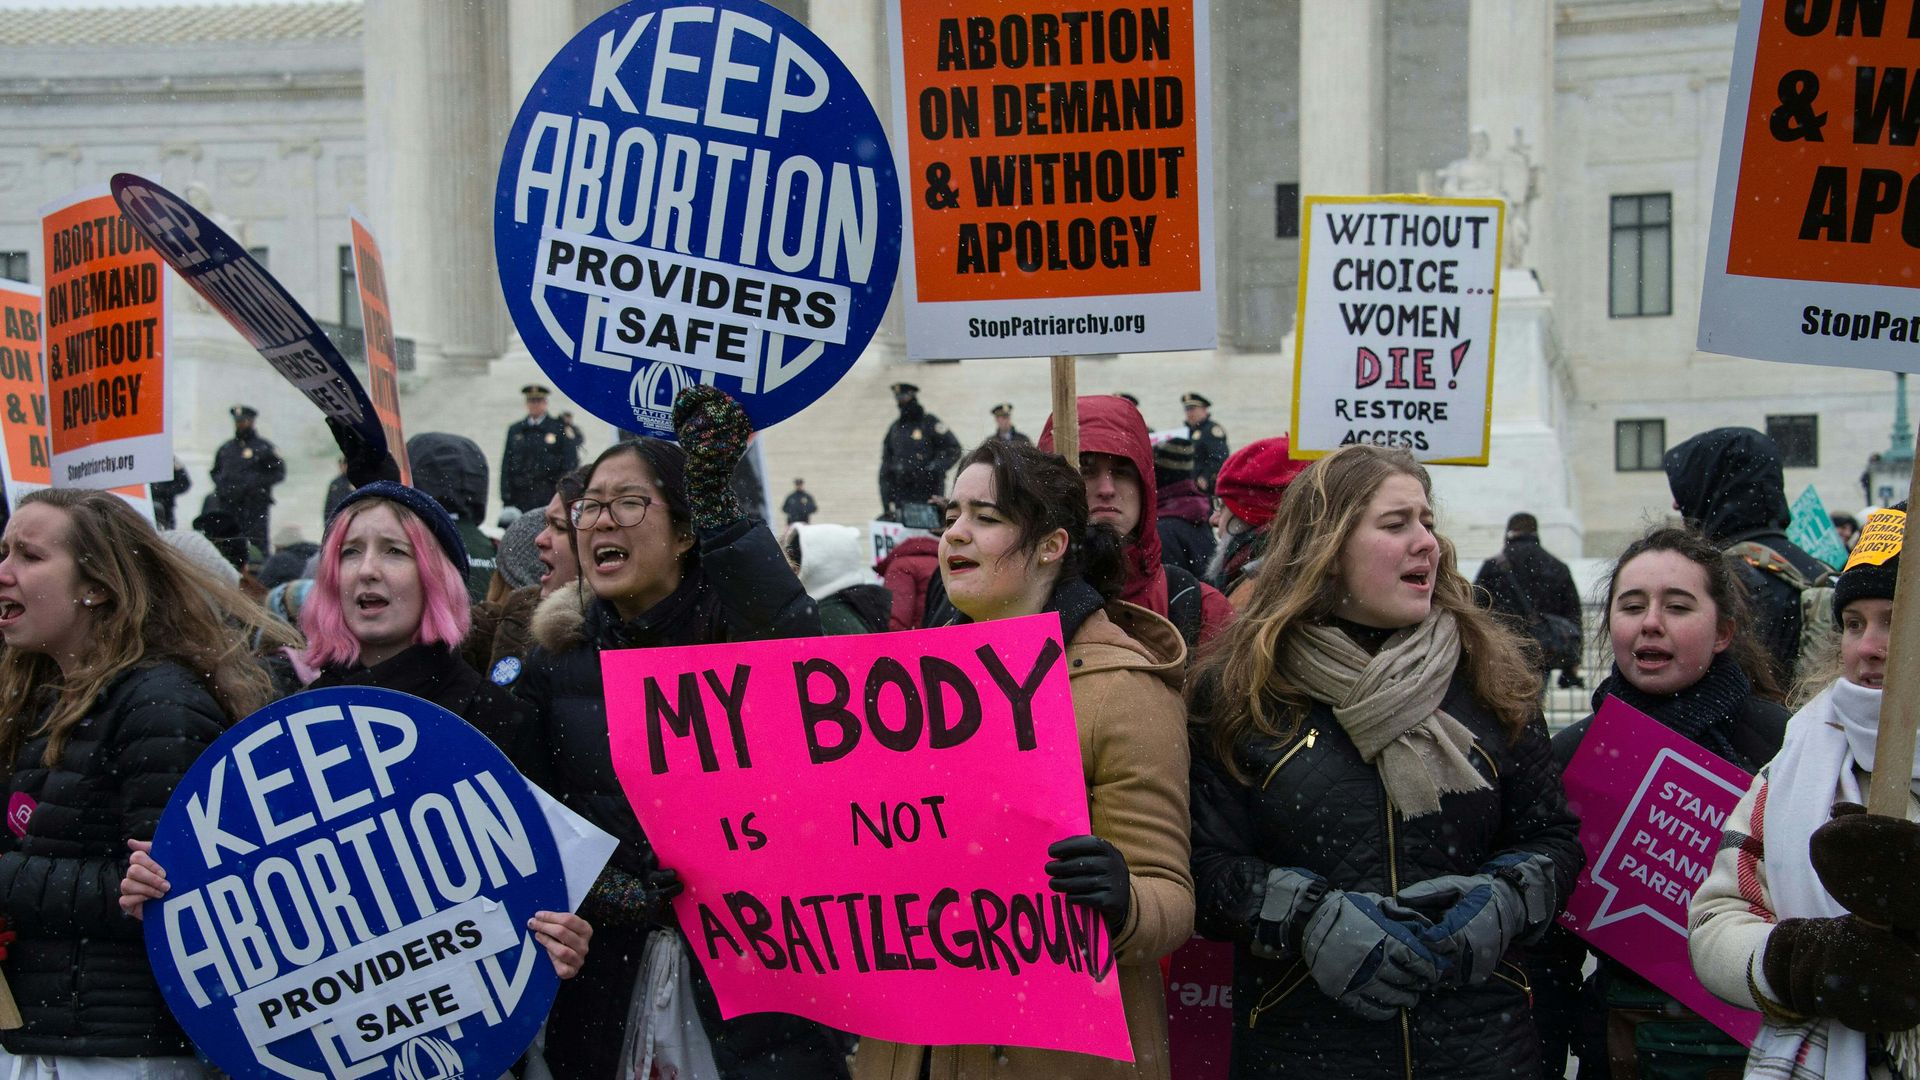 Pro-abortion protesters in Washington, D.C.